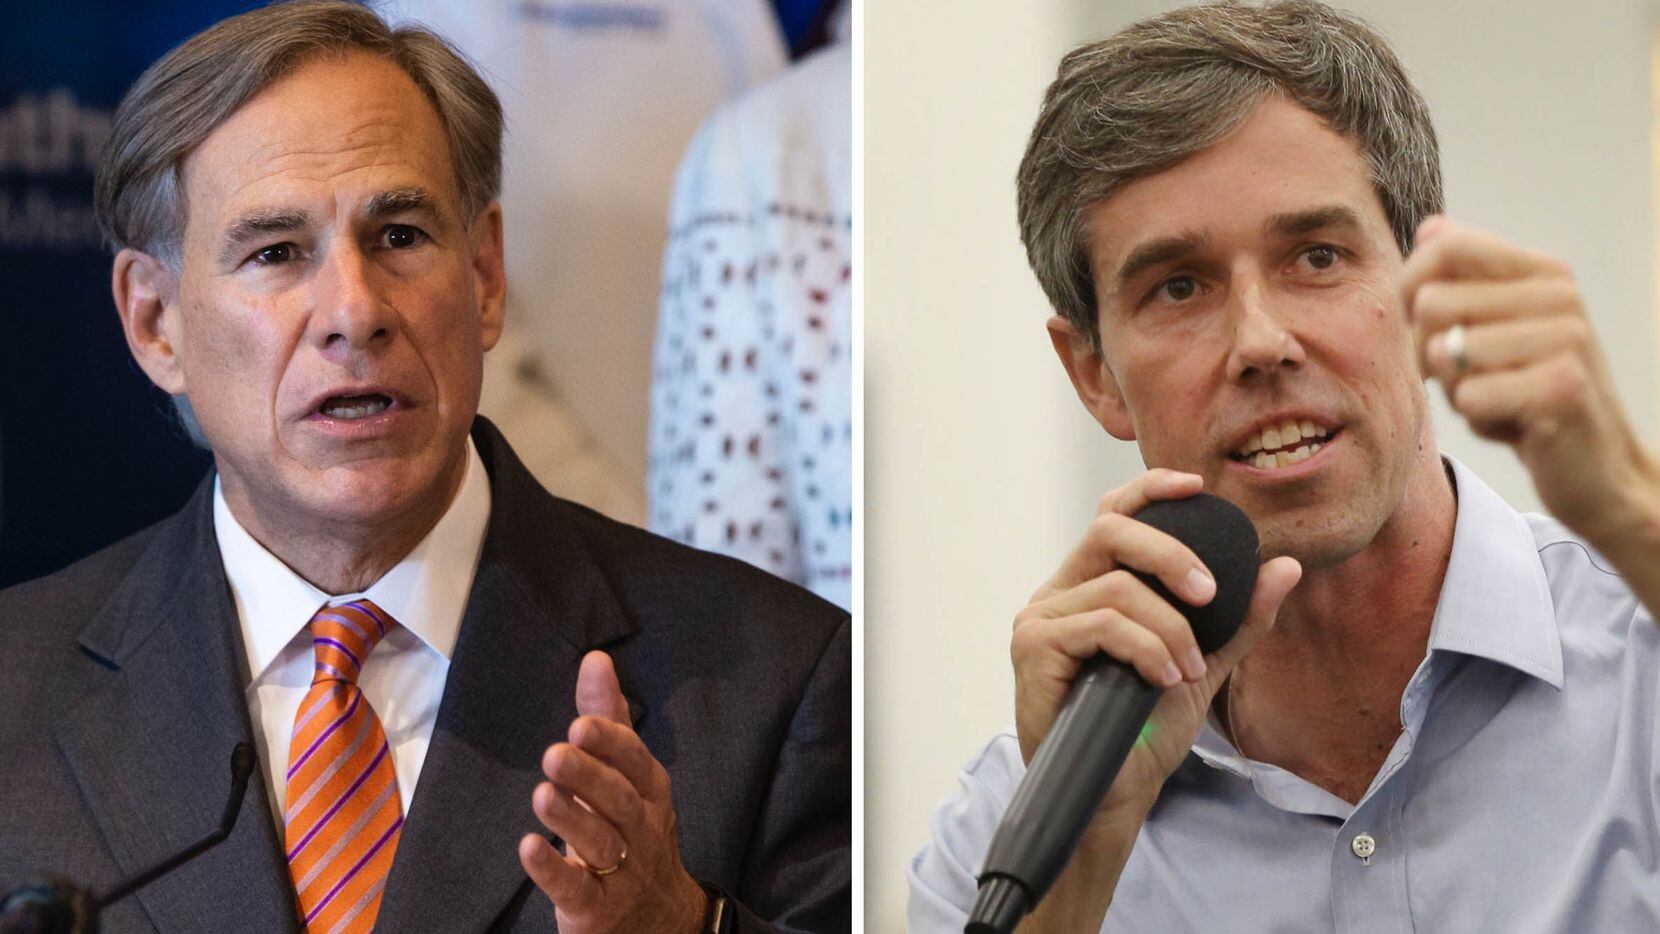 Gov. Greg Abbott, a second-term Republican, and Democrat Beto O’Rourke are sparring over how...